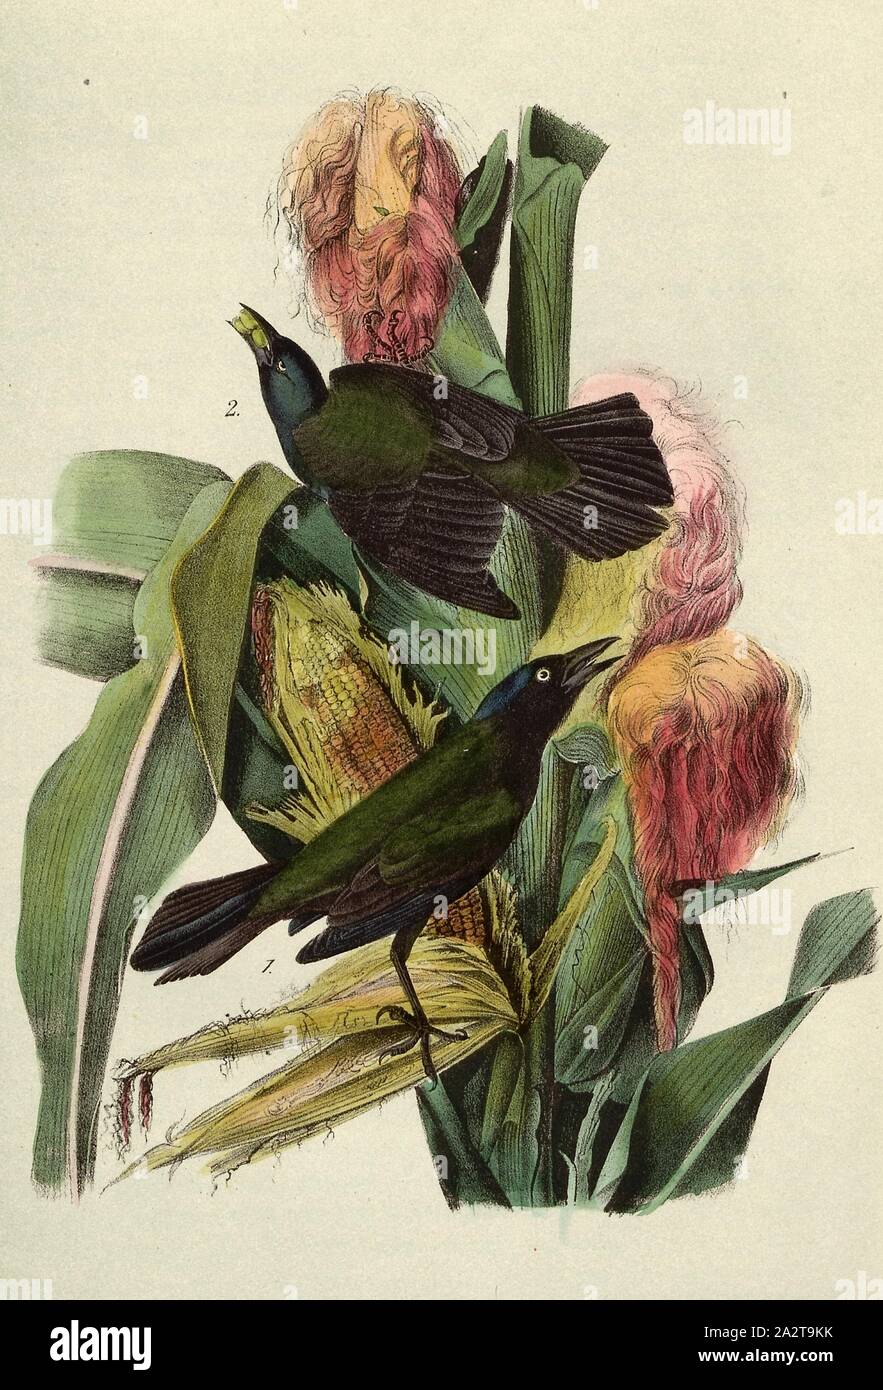 Common, or Purple Crow-Blackbird - Maize or Indian Corn, Purple Grackle (Quiscalus quiscula, Quiscalus versicolor), Corn (Zea maysj indurata), Signed: J.J. Audubon, J.T. Bowen, lithograph, Pl. 221 (vol. 4), Audubon, John James (drawn); Bowen, J. T. (lith.), 1856, John James Audubon: The birds of America: from drawings made in the United States and their territories. New York: Audubon, 1856 Stock Photo